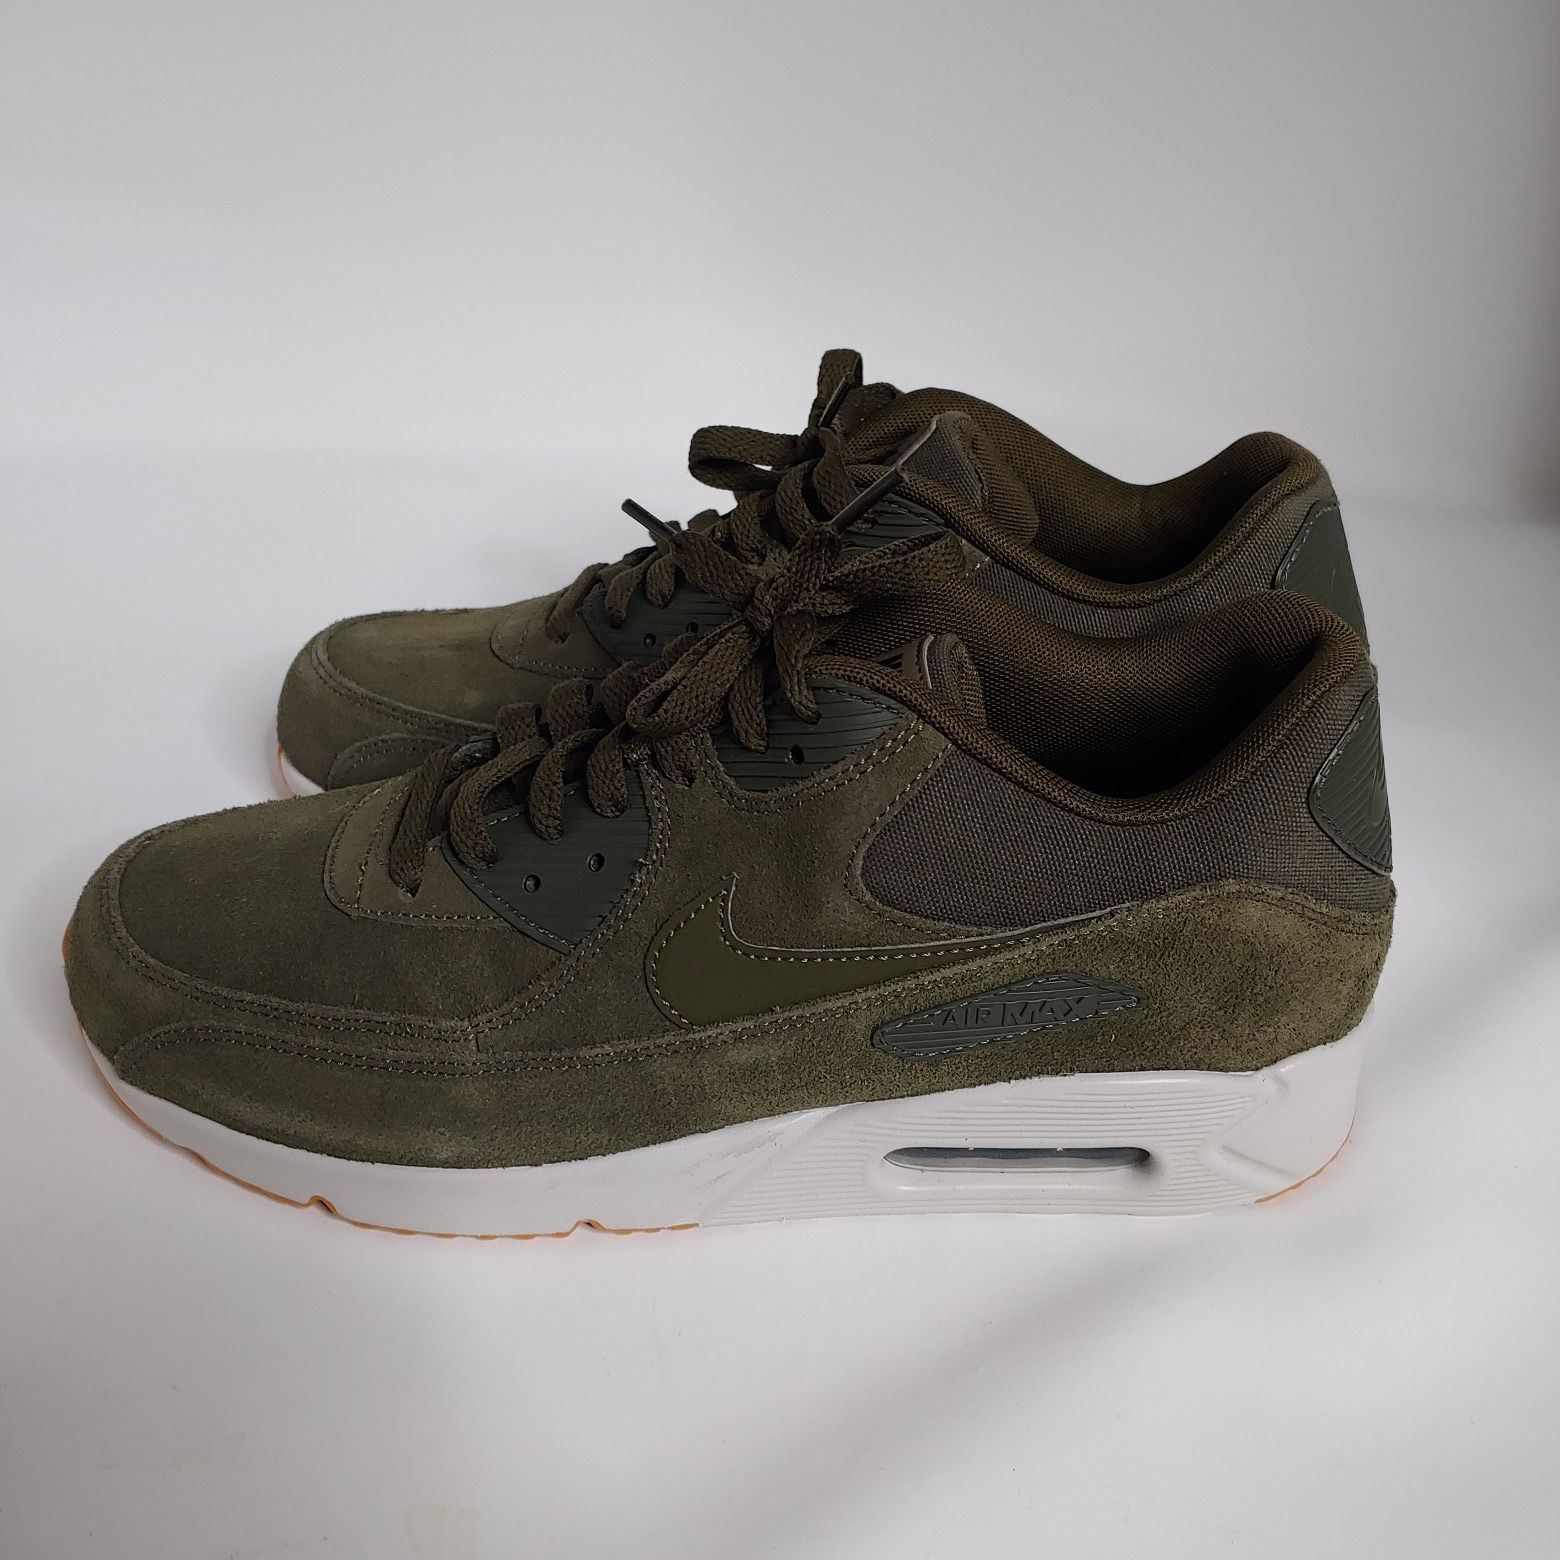 Nike Air Max 90 Ultra 2.0 Leather Men's Olive Canvas 924447-301 Size 9.5